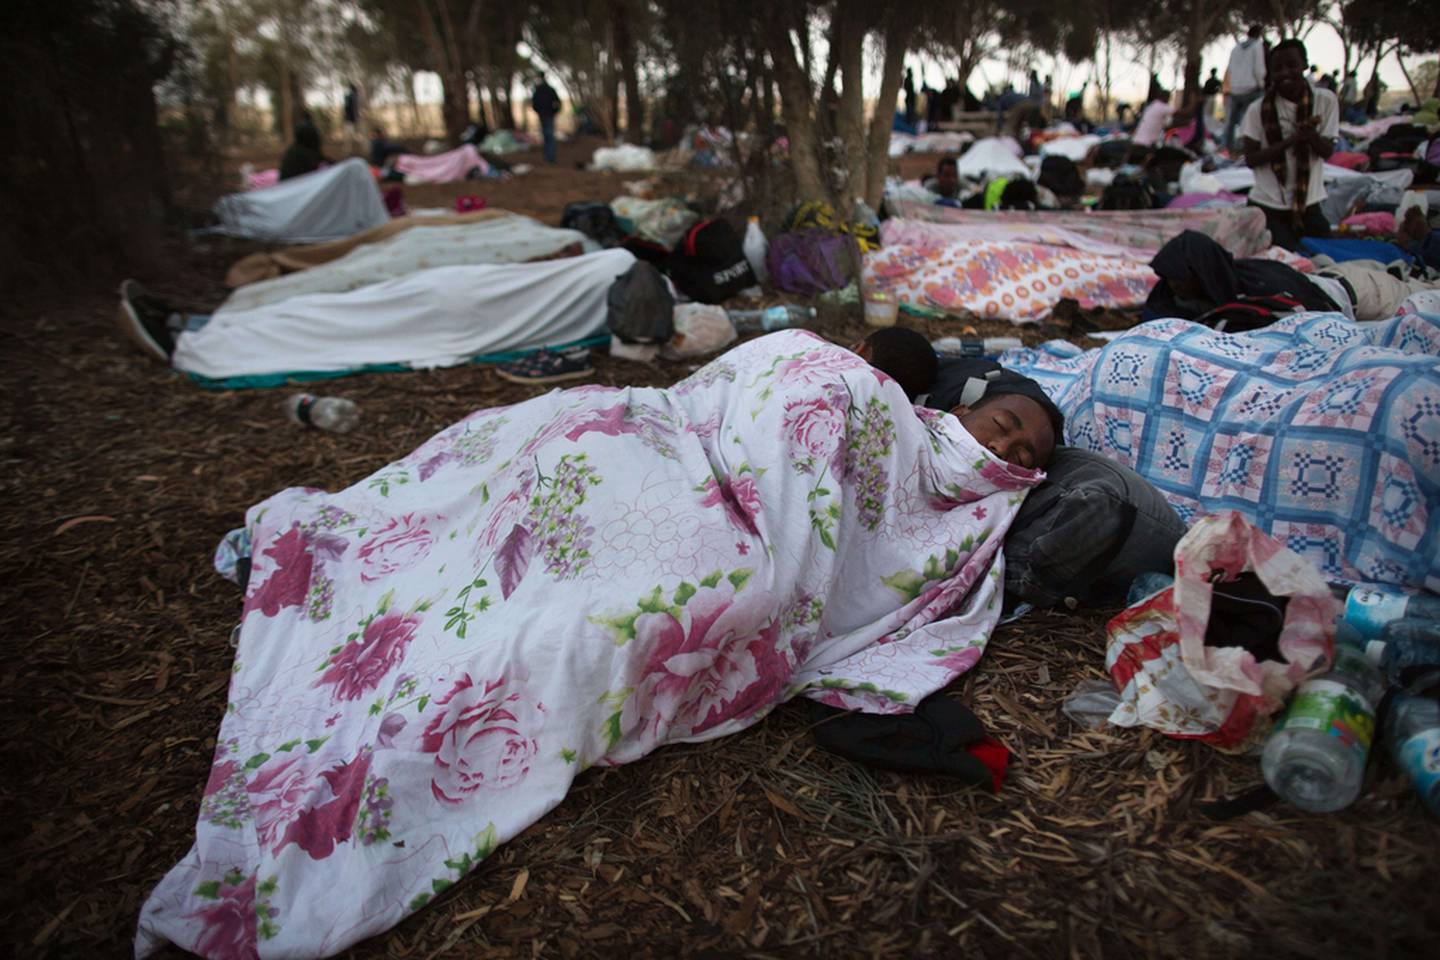 Asylum seekers at an outdoor camp near Nitzana border crossing with Egypt in the Negev Desert in 2014. AFP